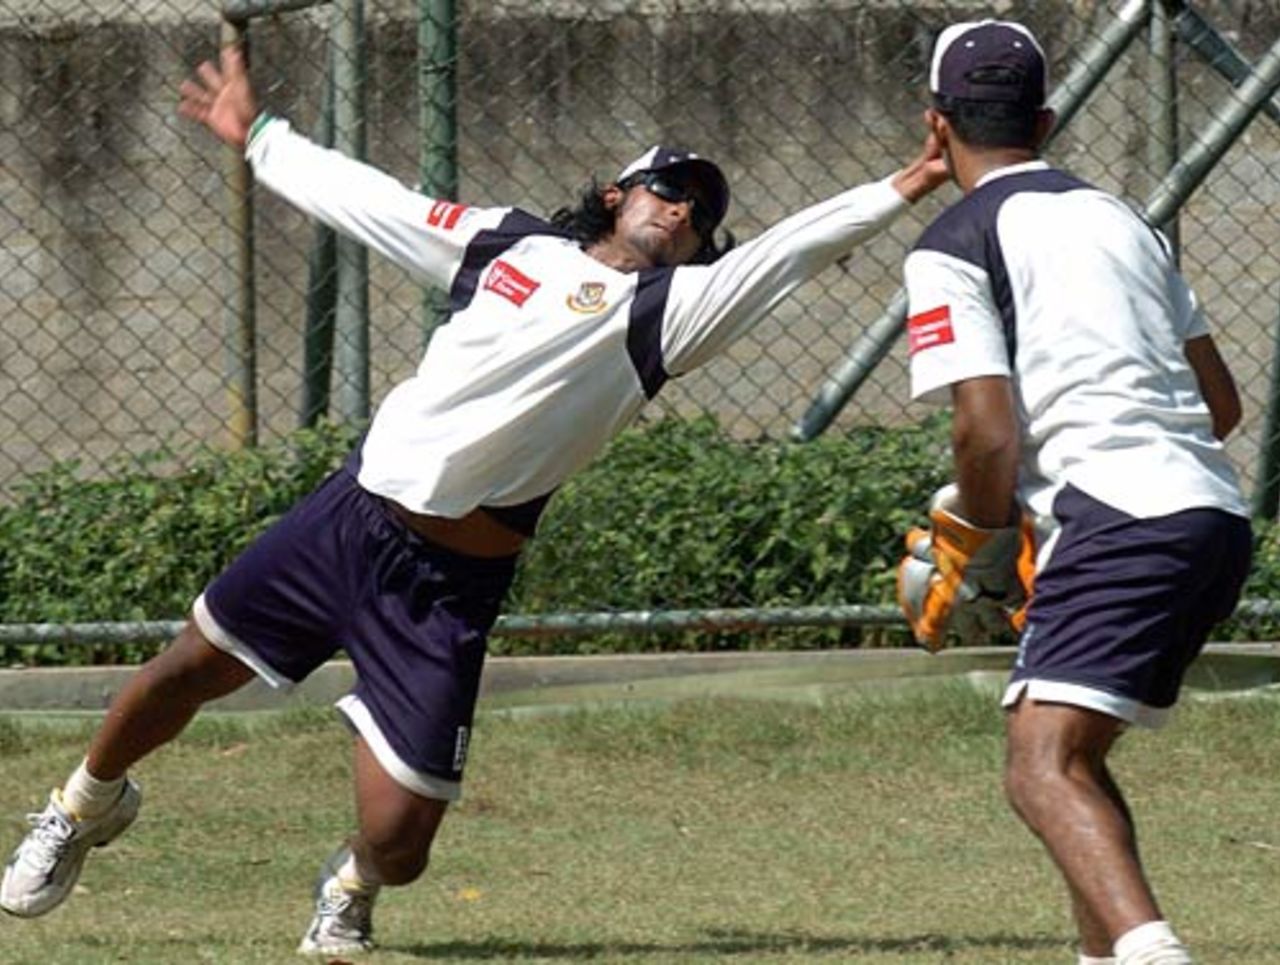 Shahriar Nafees dives for a catch in practice, Colombo, August 27, 2005